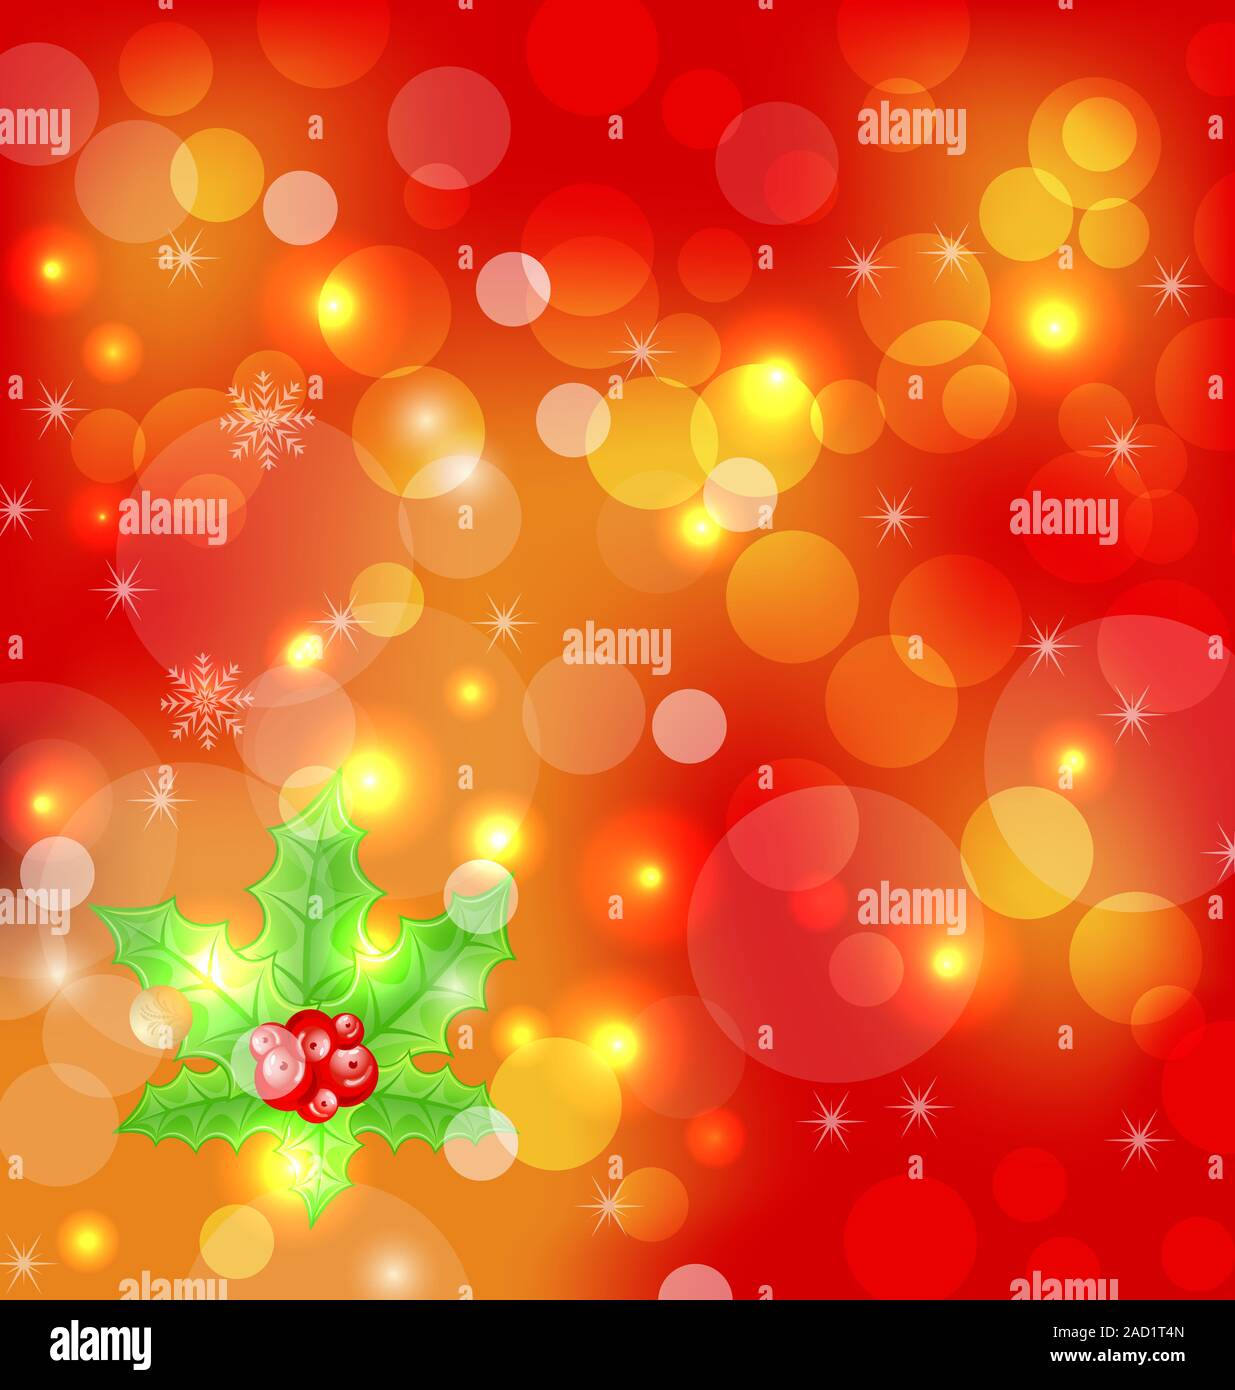 Christmas holiday wallpaper with decoration Stock Photo